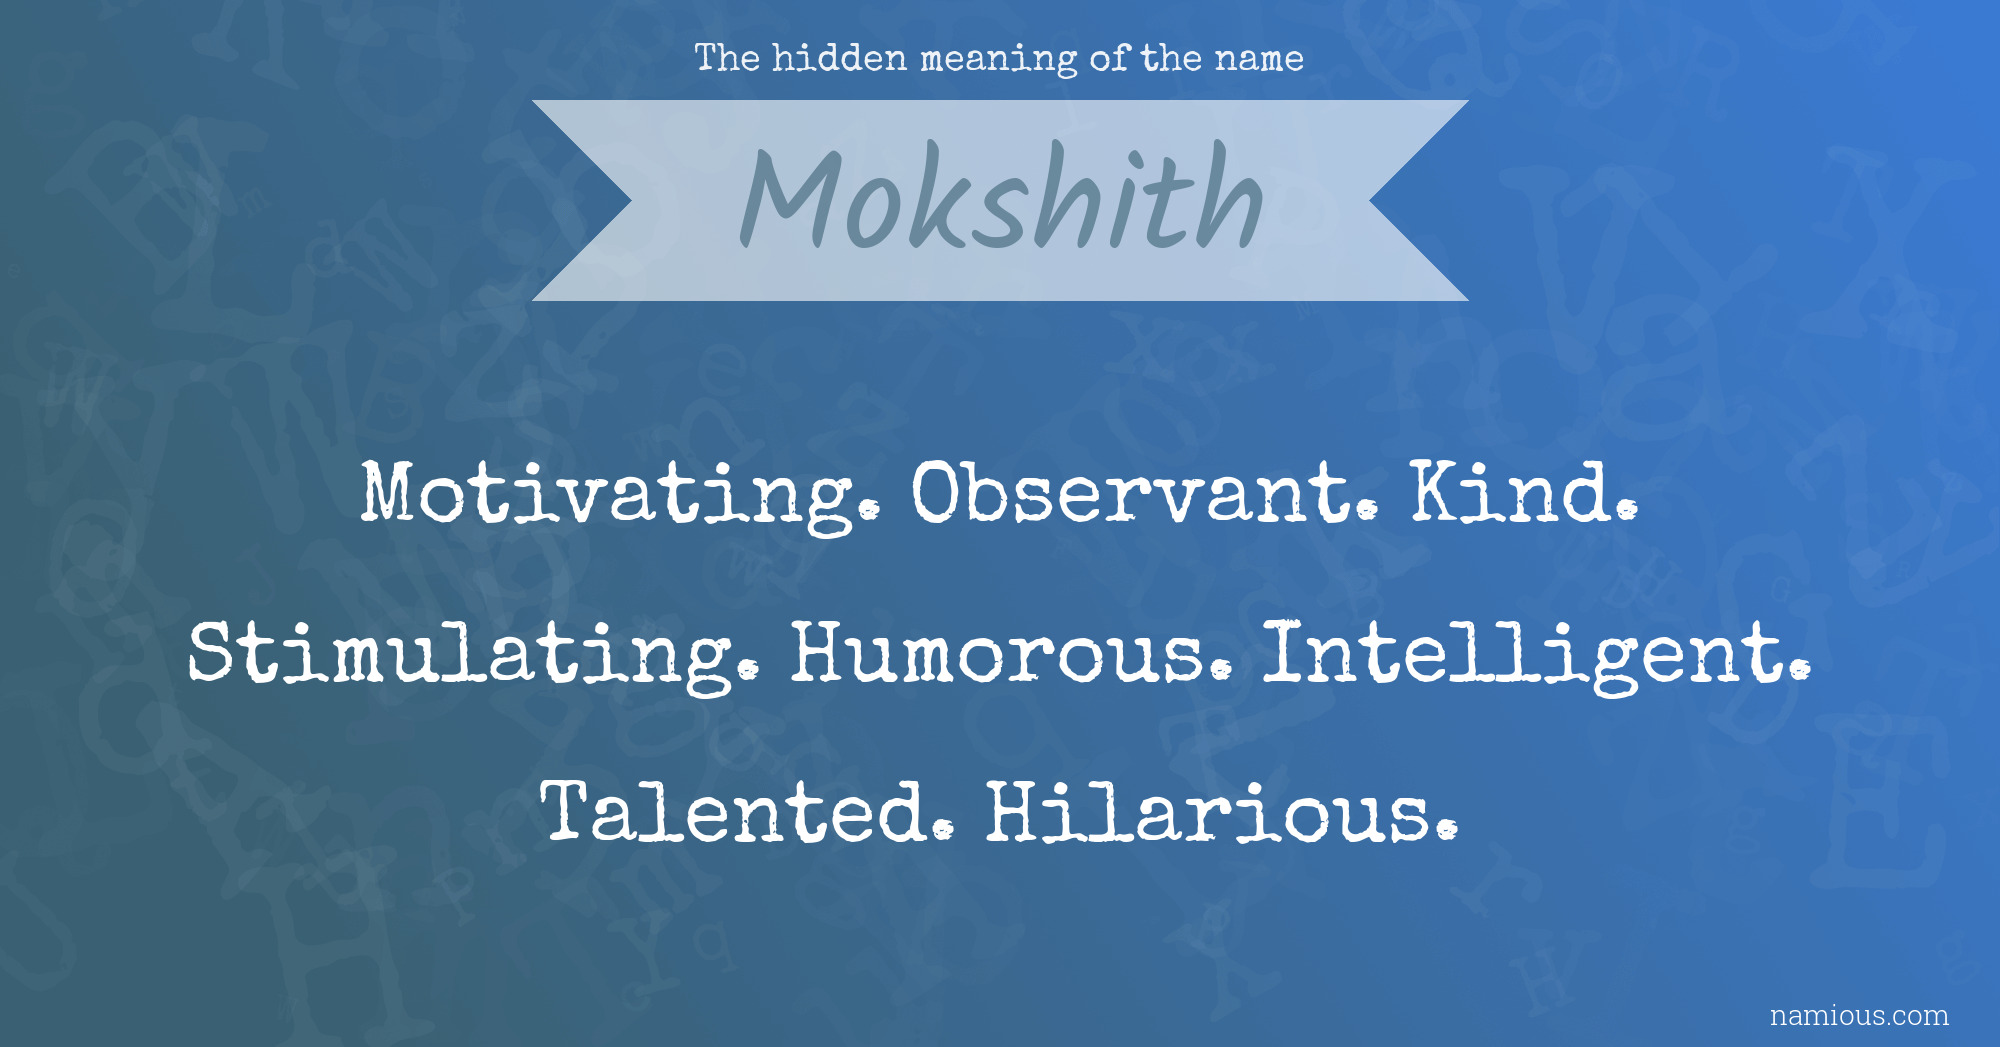 The hidden meaning of the name Mokshith